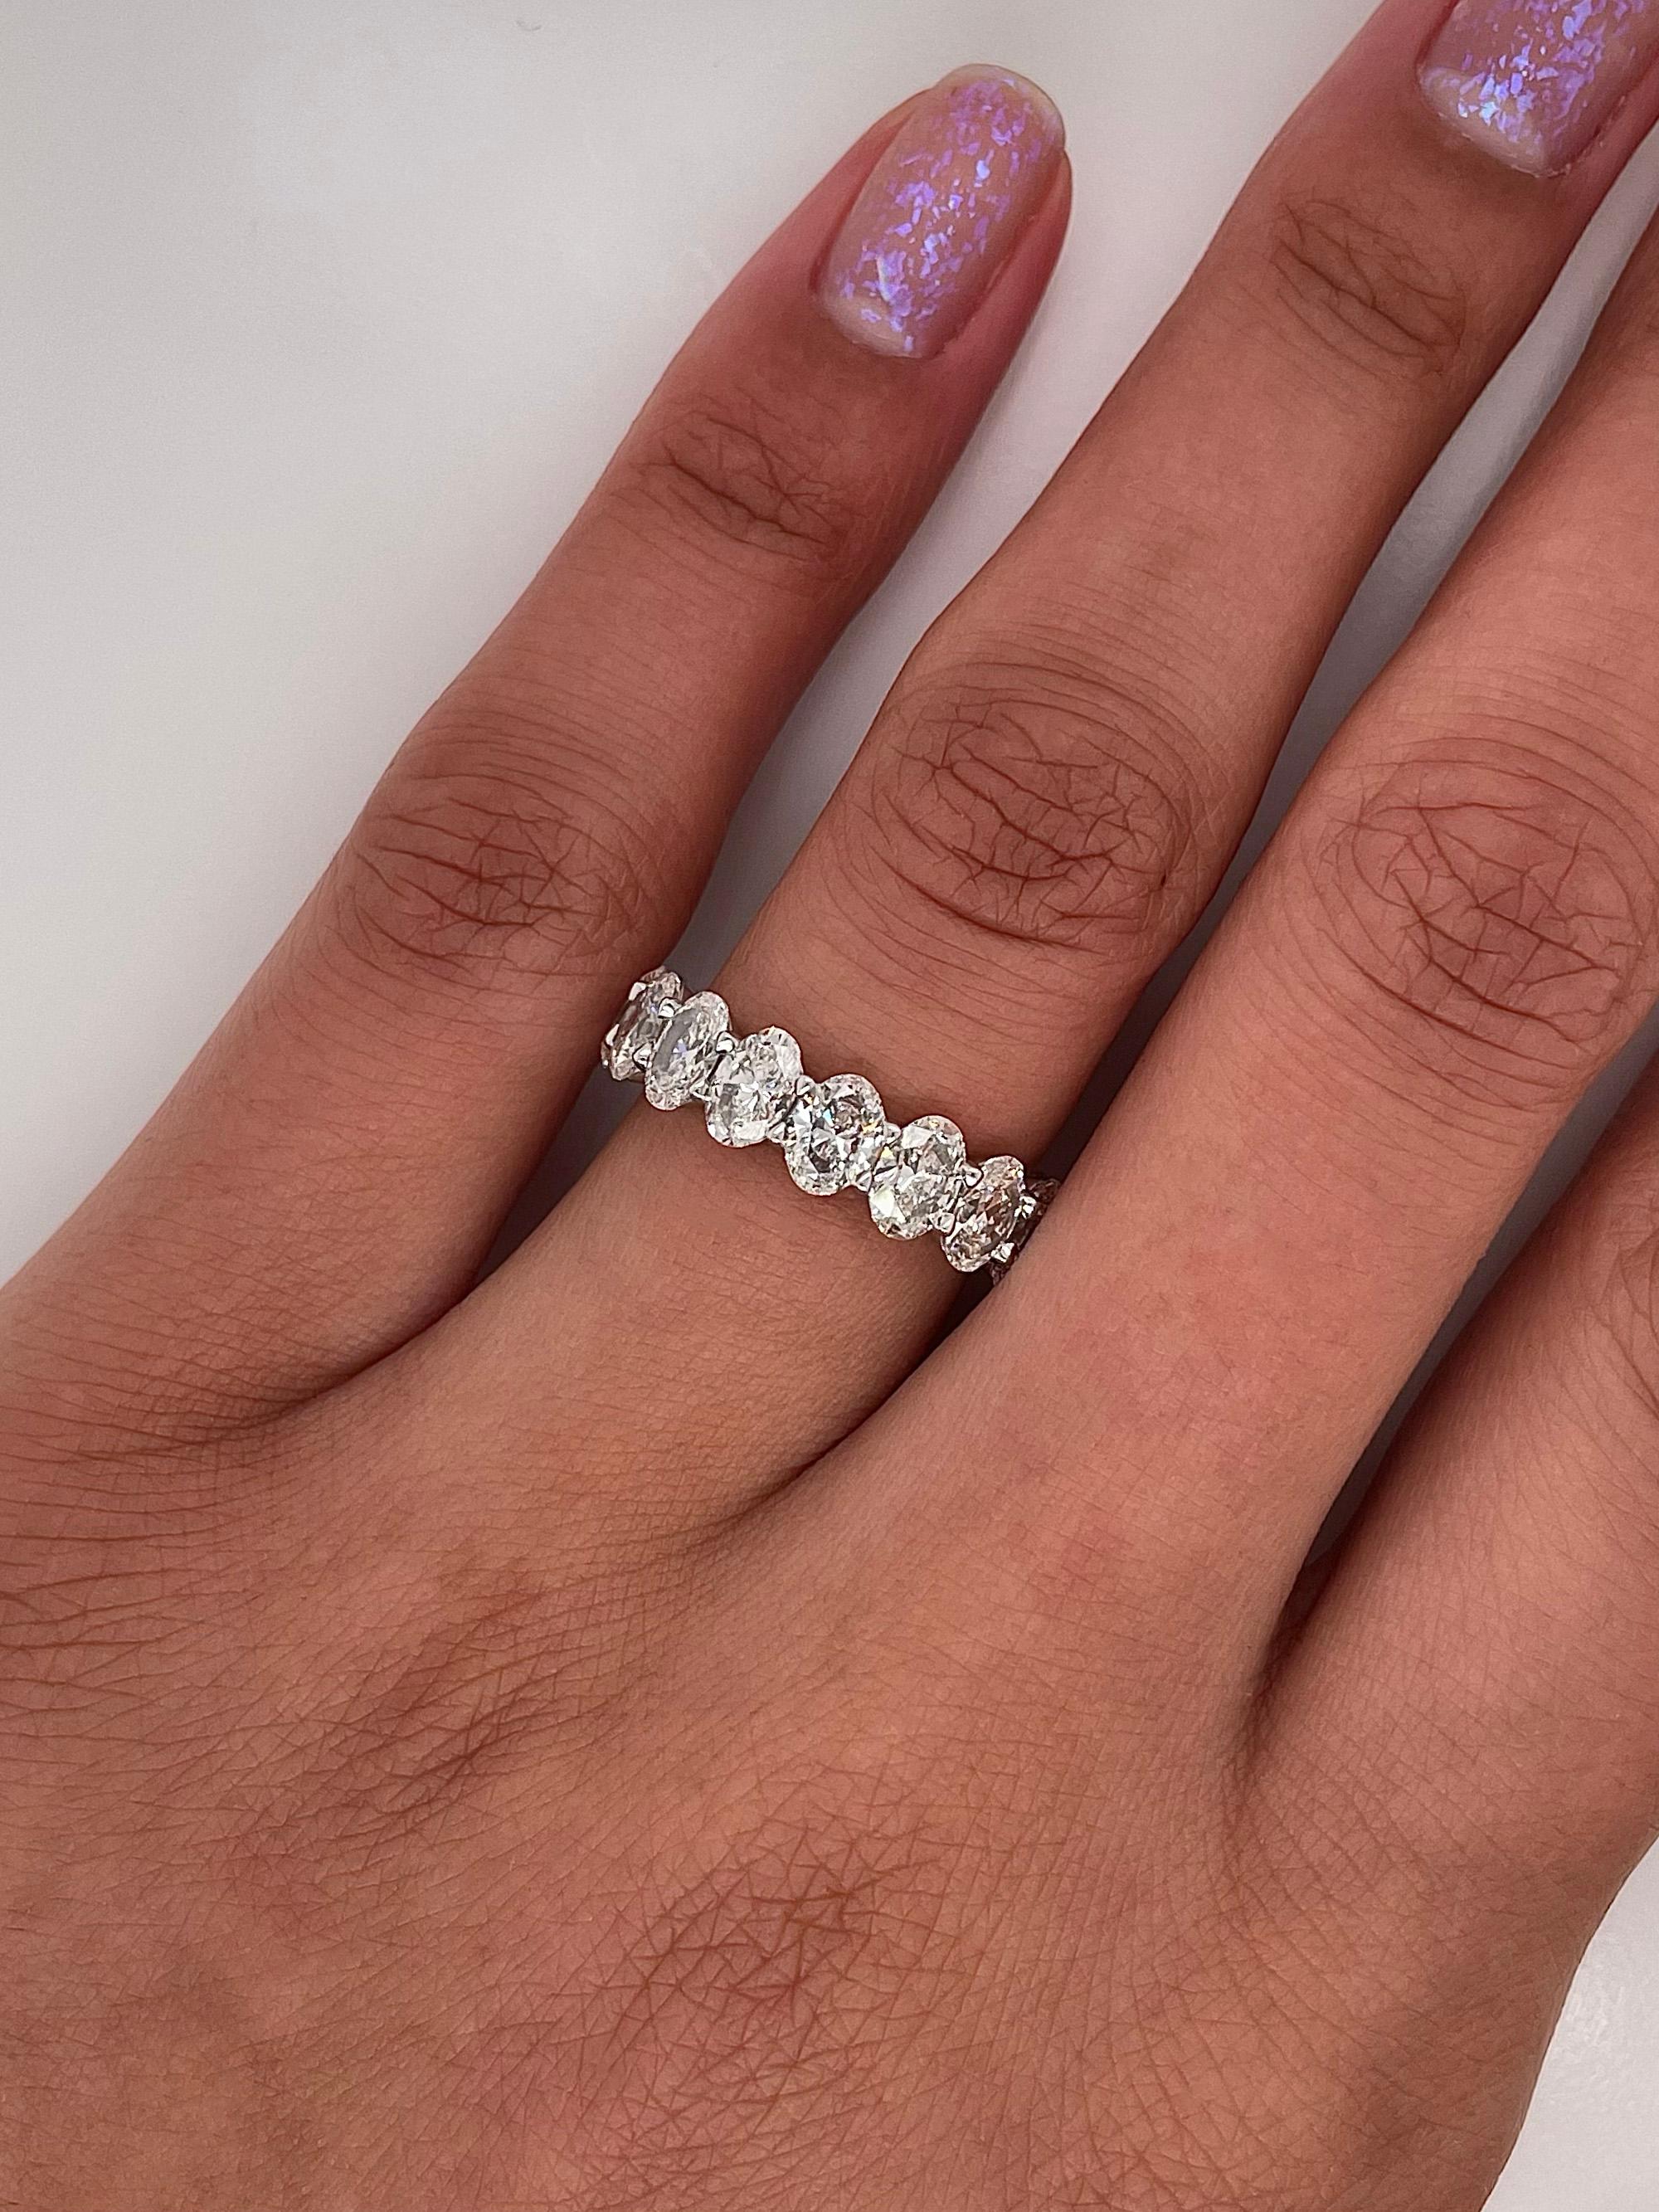 Ladies diamond Eternity band carries a total of 5.07ct of oval cut diamonds placed in platinum.

Size: 6.0
Color: G-H
Clarity: VS1

This shared prong style Eternity band was handmade by our jewelers in New York City 